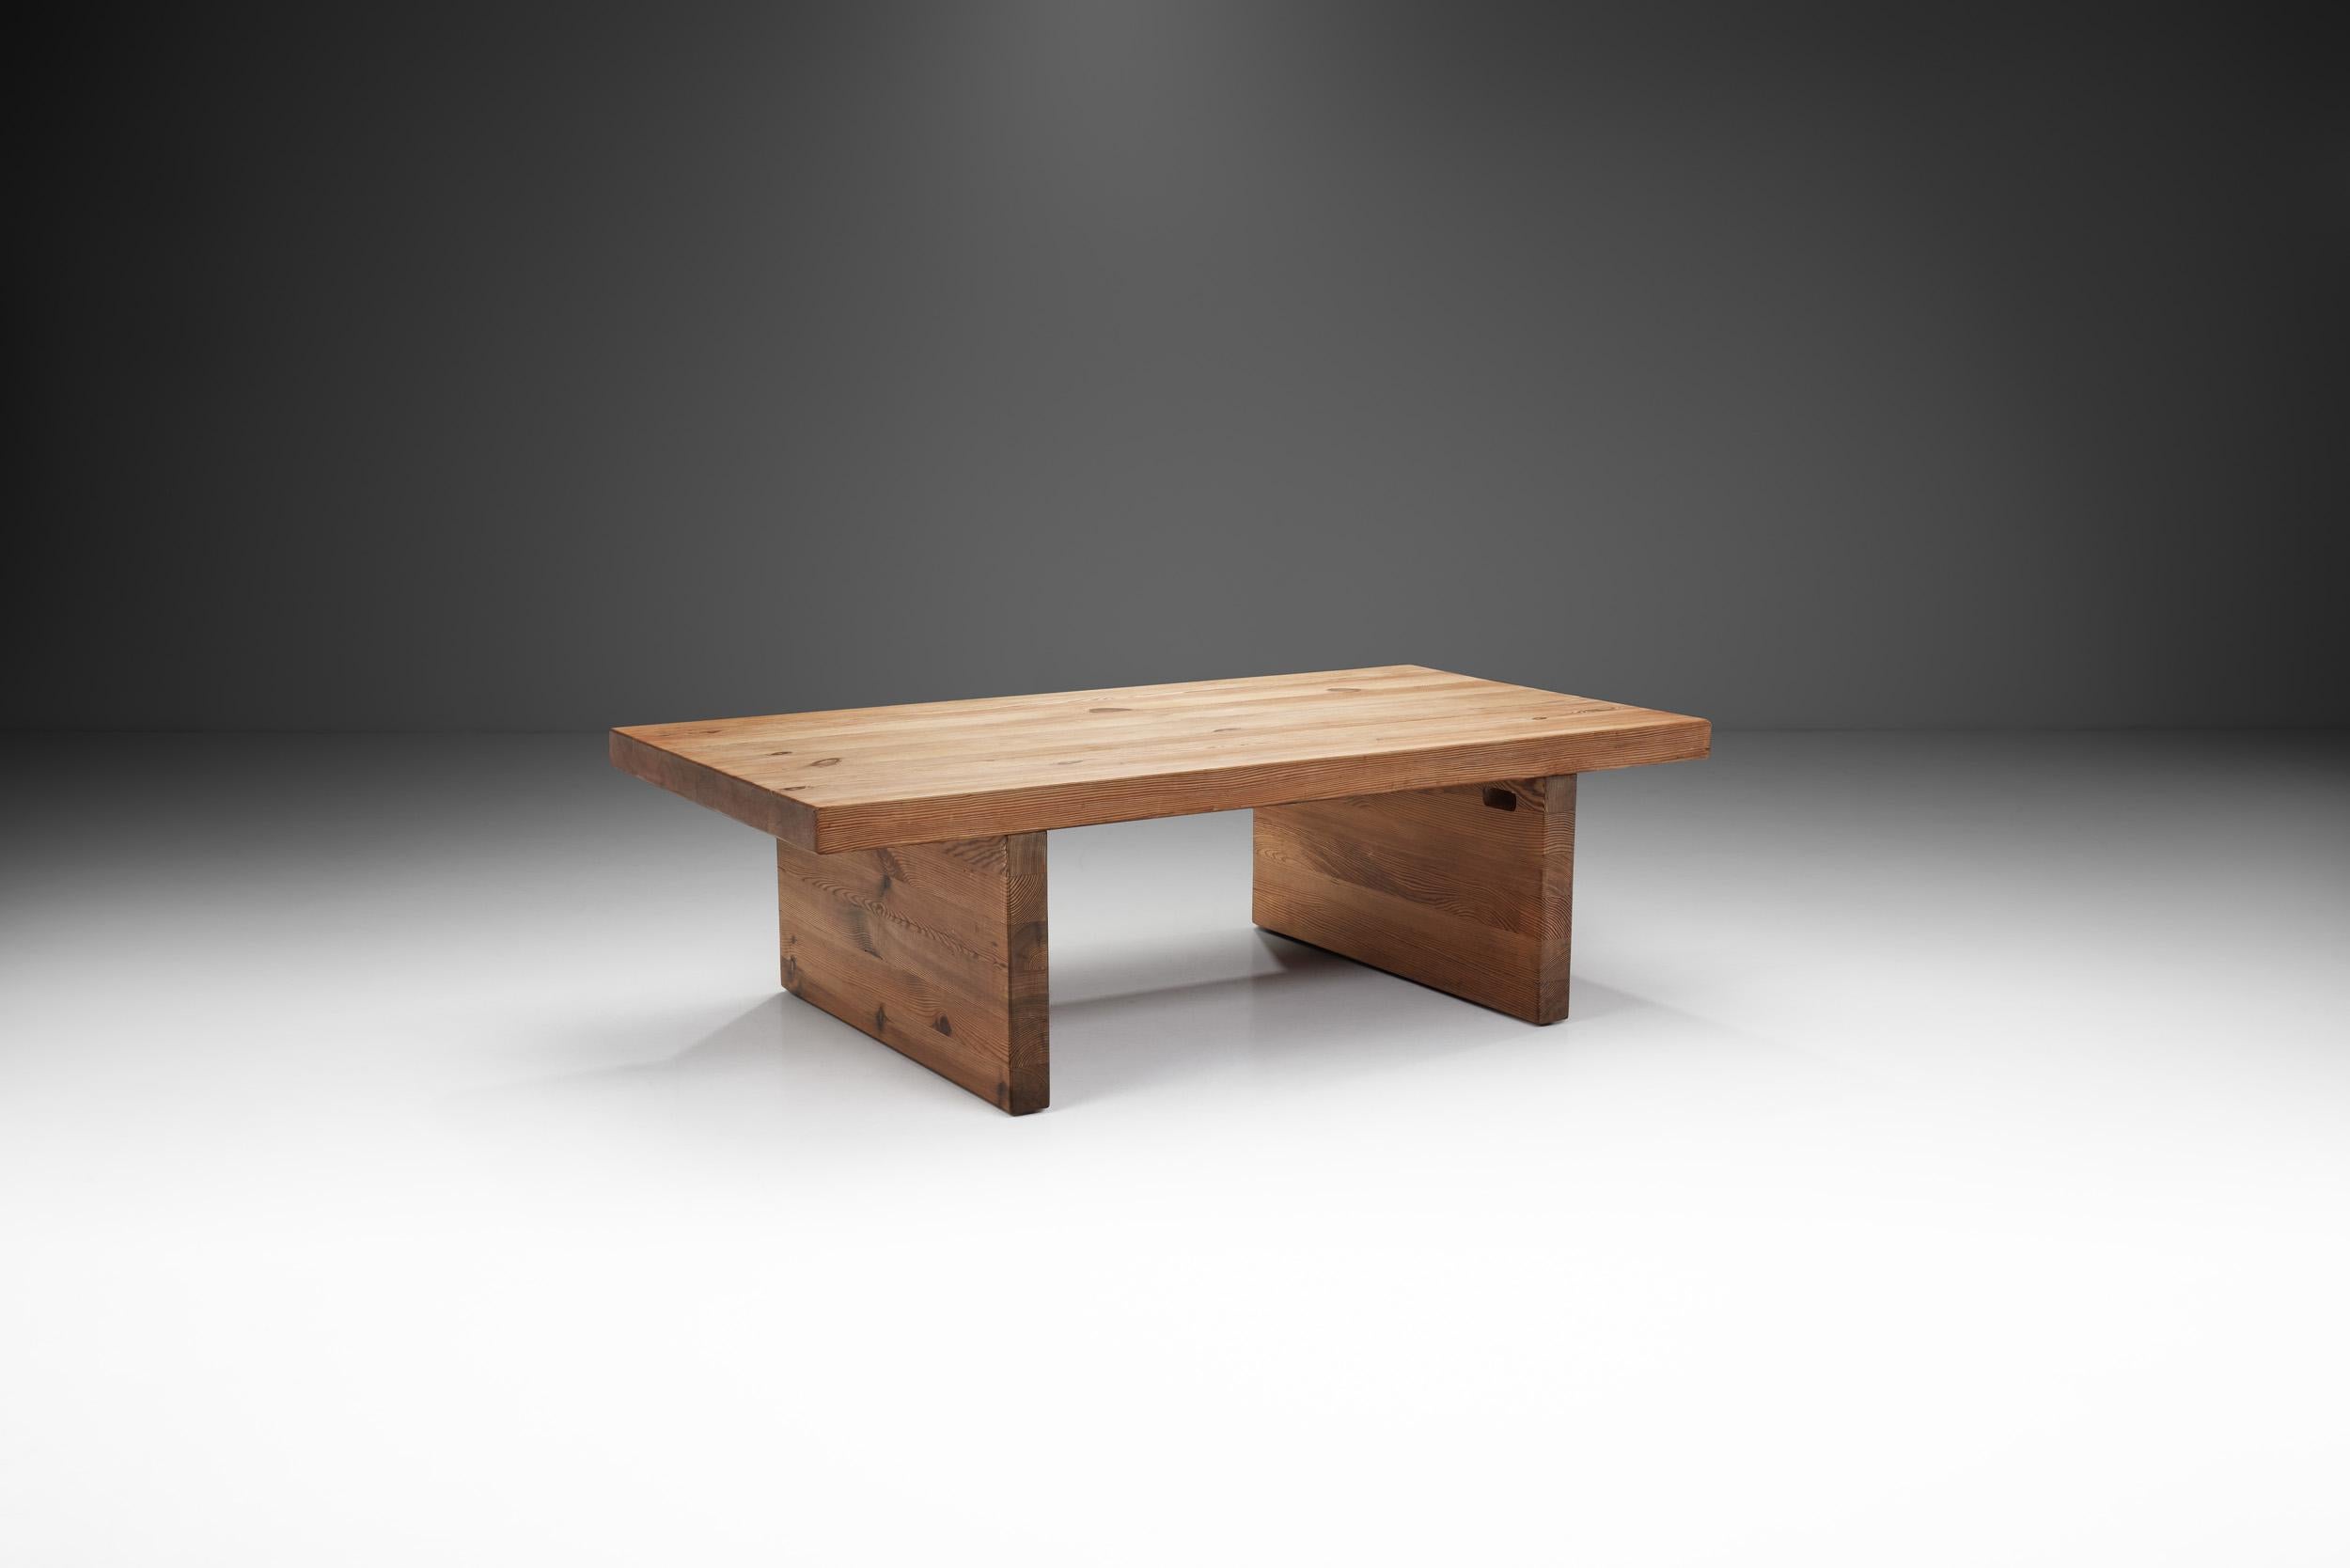 In Scandinavian mid-century design, there was an early emphasis on wood as it connected everyday objects, such as furniture to nature. This rustic, solid pine coffee table is a perfect example of this sentiment, and of the visual benefits of an